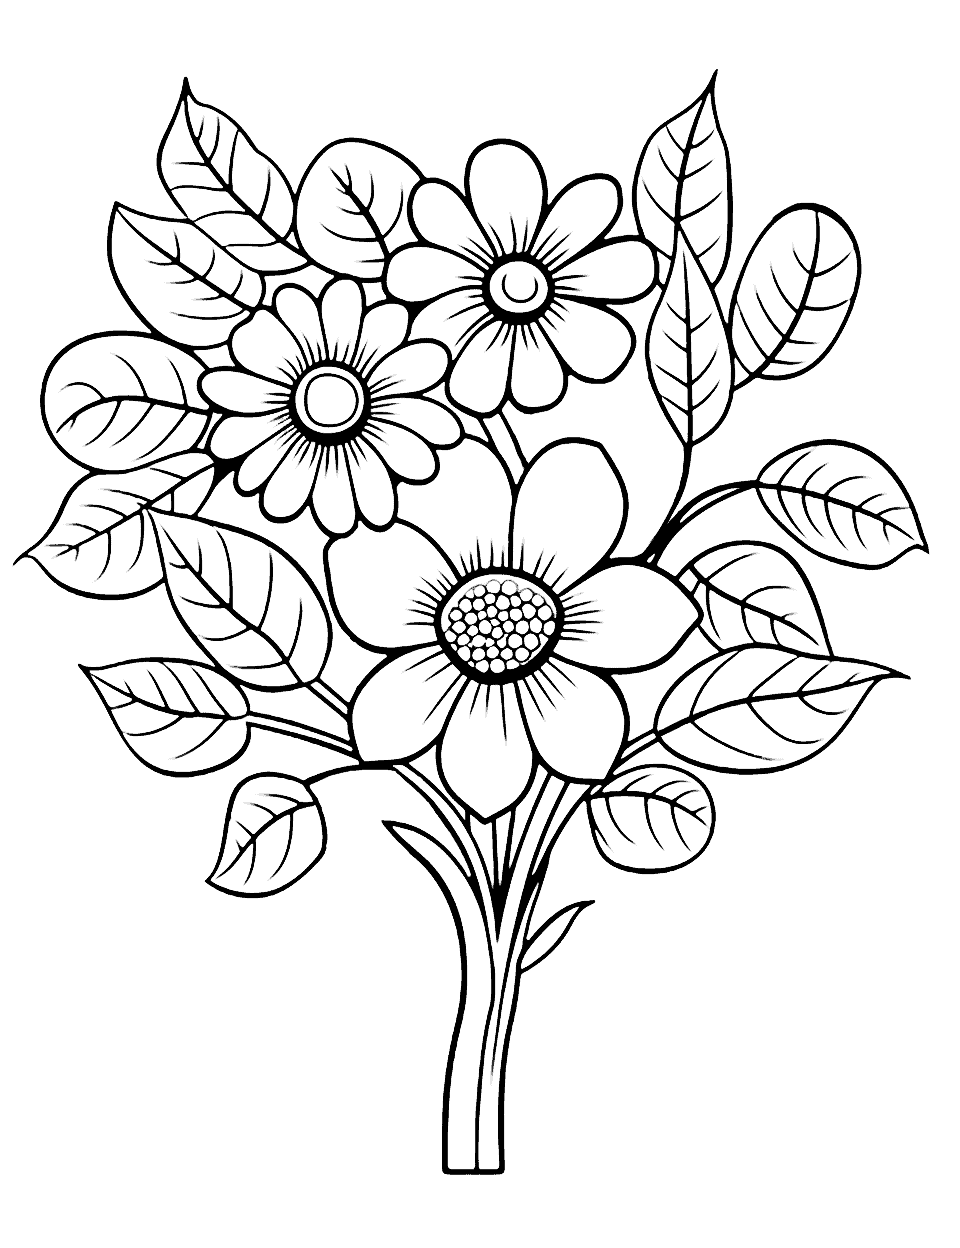 Beautiful Floral Heart Flower Coloring Page - An intricate heart design filled with beautiful flowers.